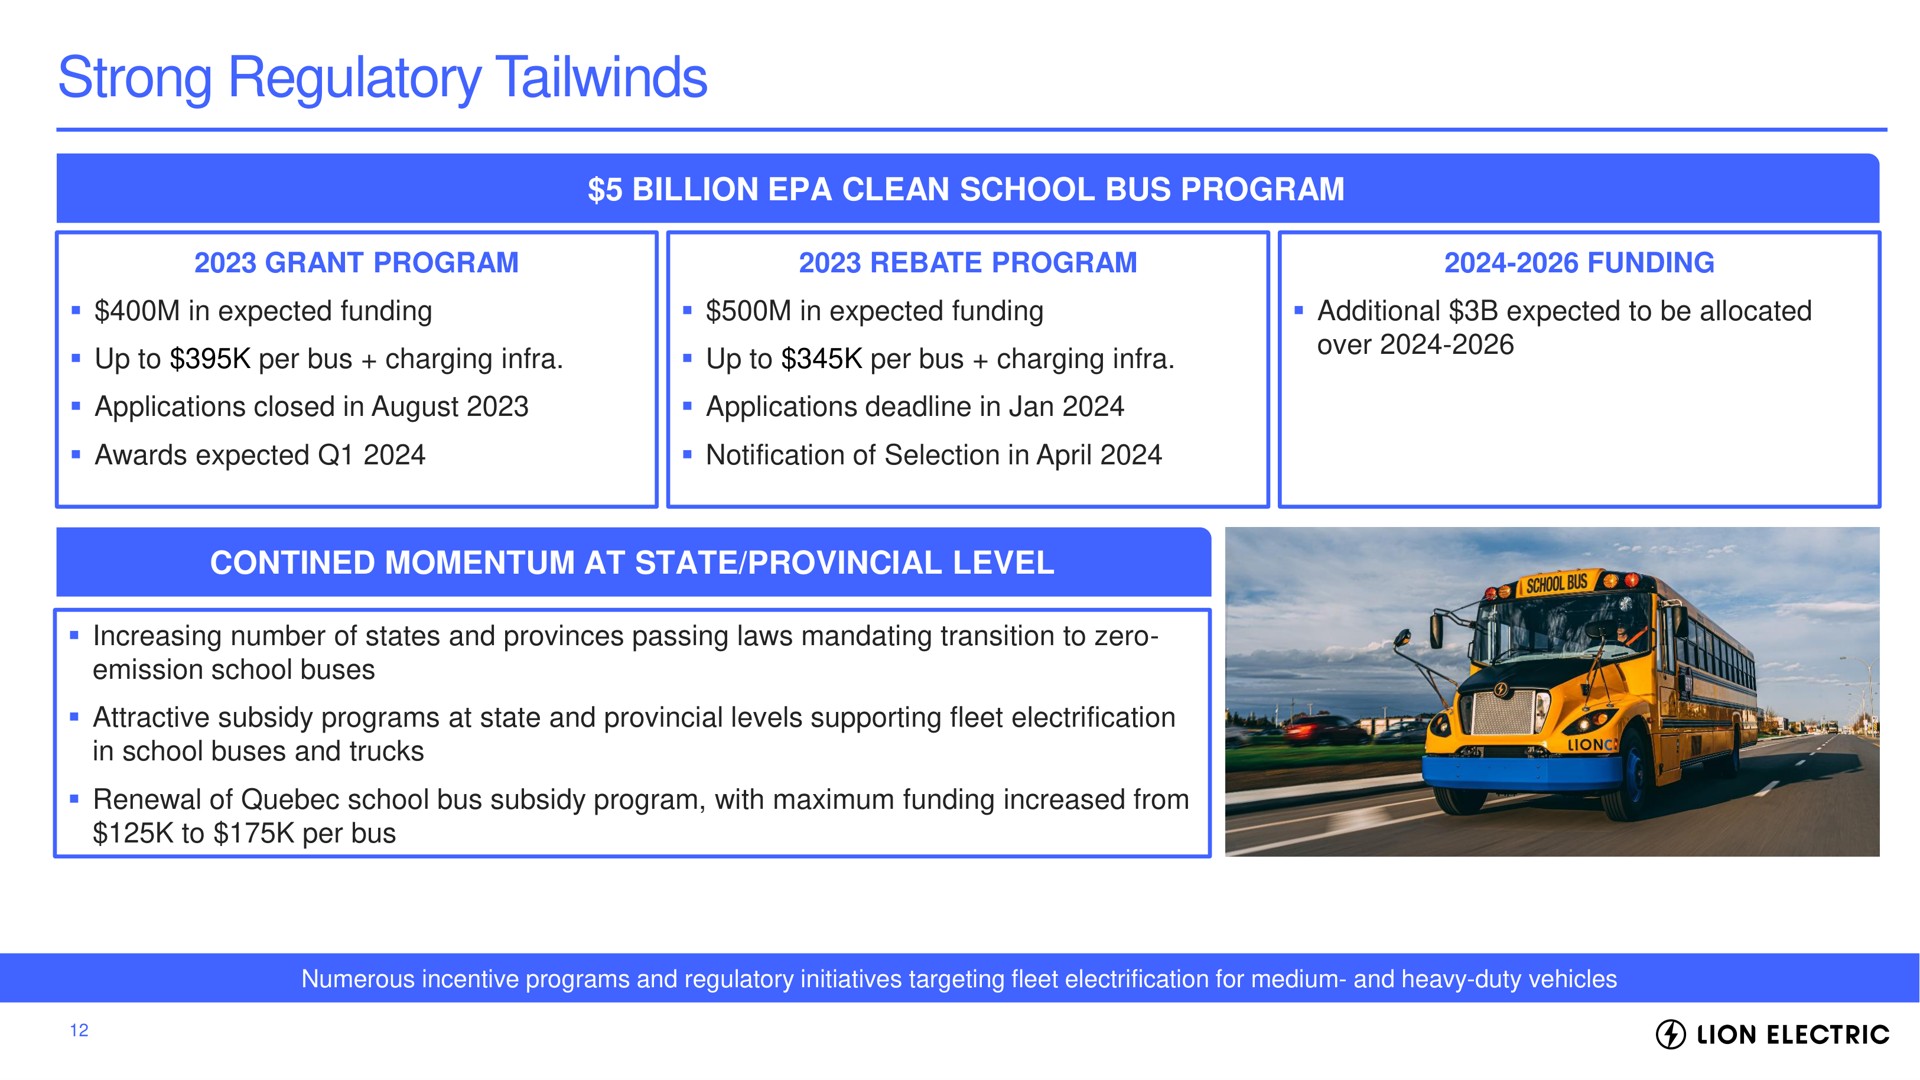 strong regulatory billion clean school bus program grant program rebate program funding applications closed in august applications deadline in awards expected notification of selection in momentum at state provincial level in school buses and trucks to per bus lion electric | Lion Electric